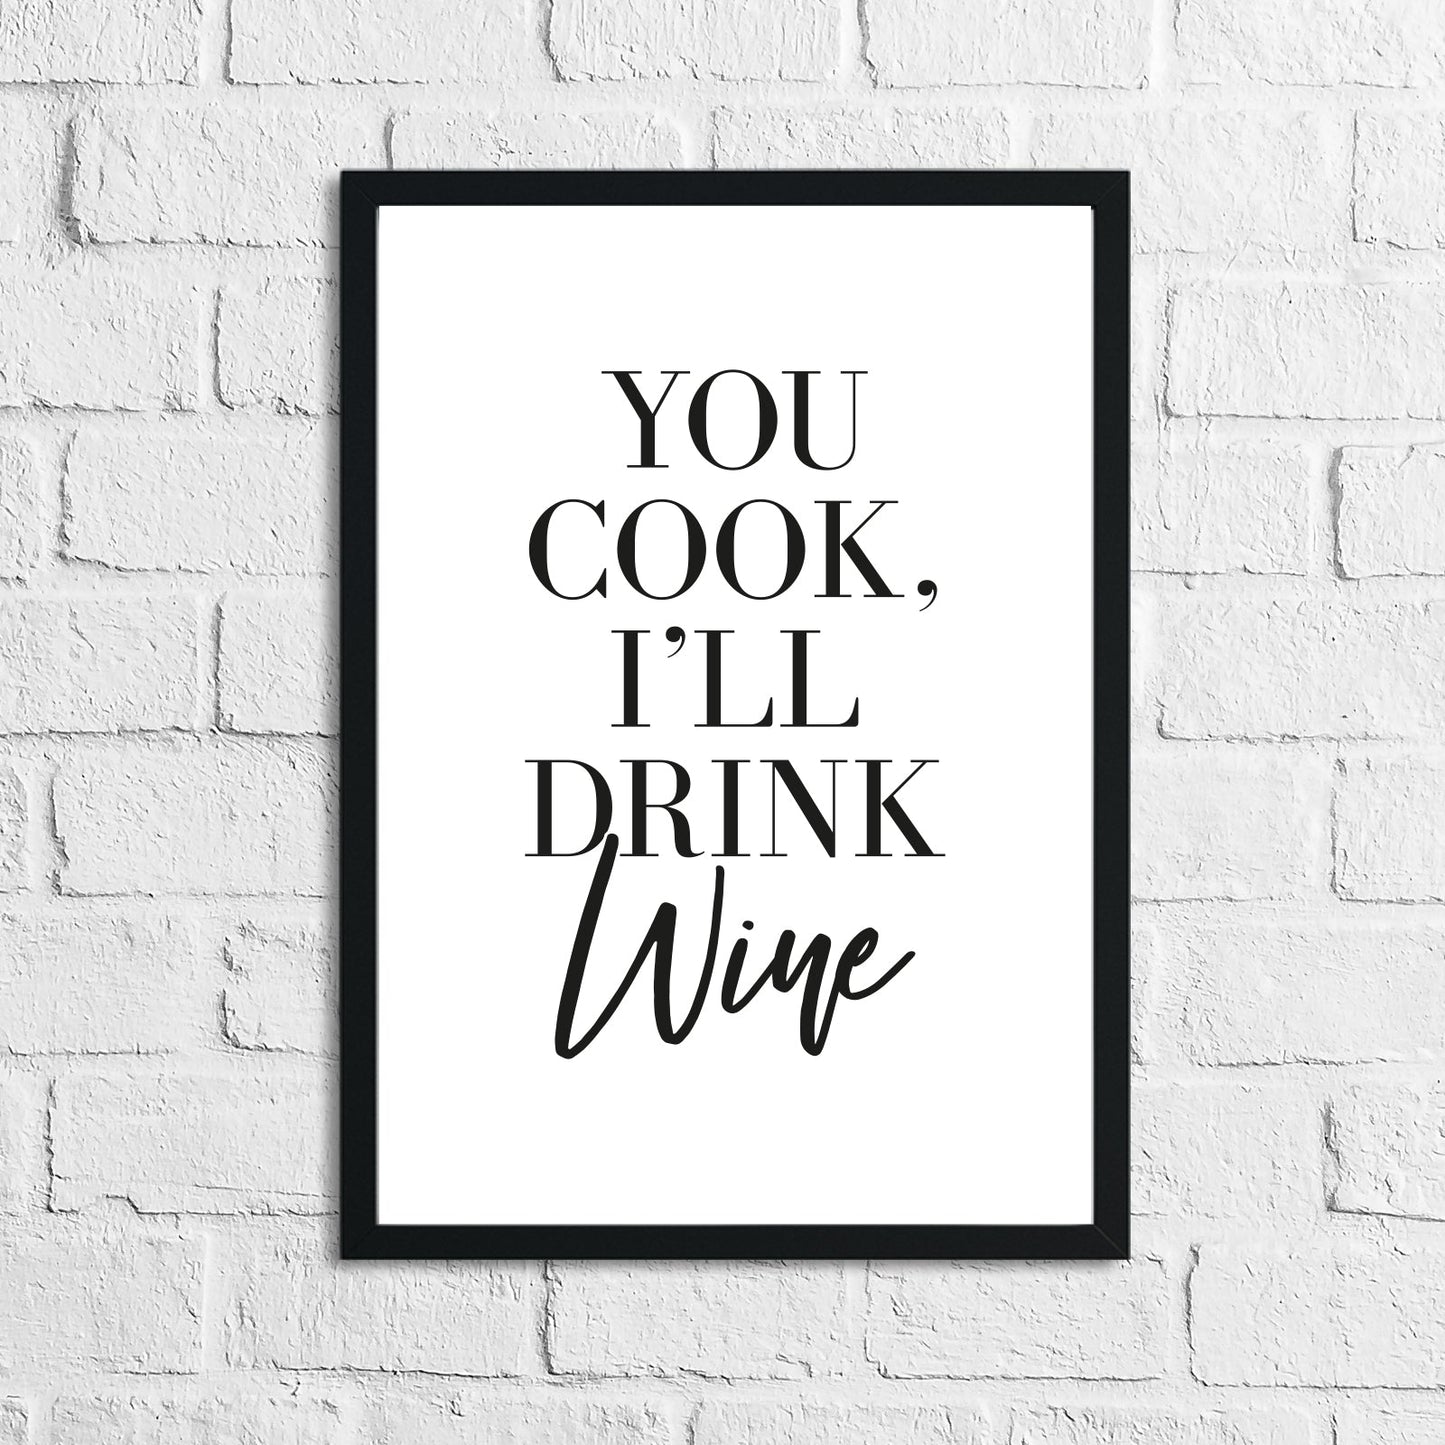 You Cook, I'll Drink Wine Alcohol Kitchen Wall Decor Print